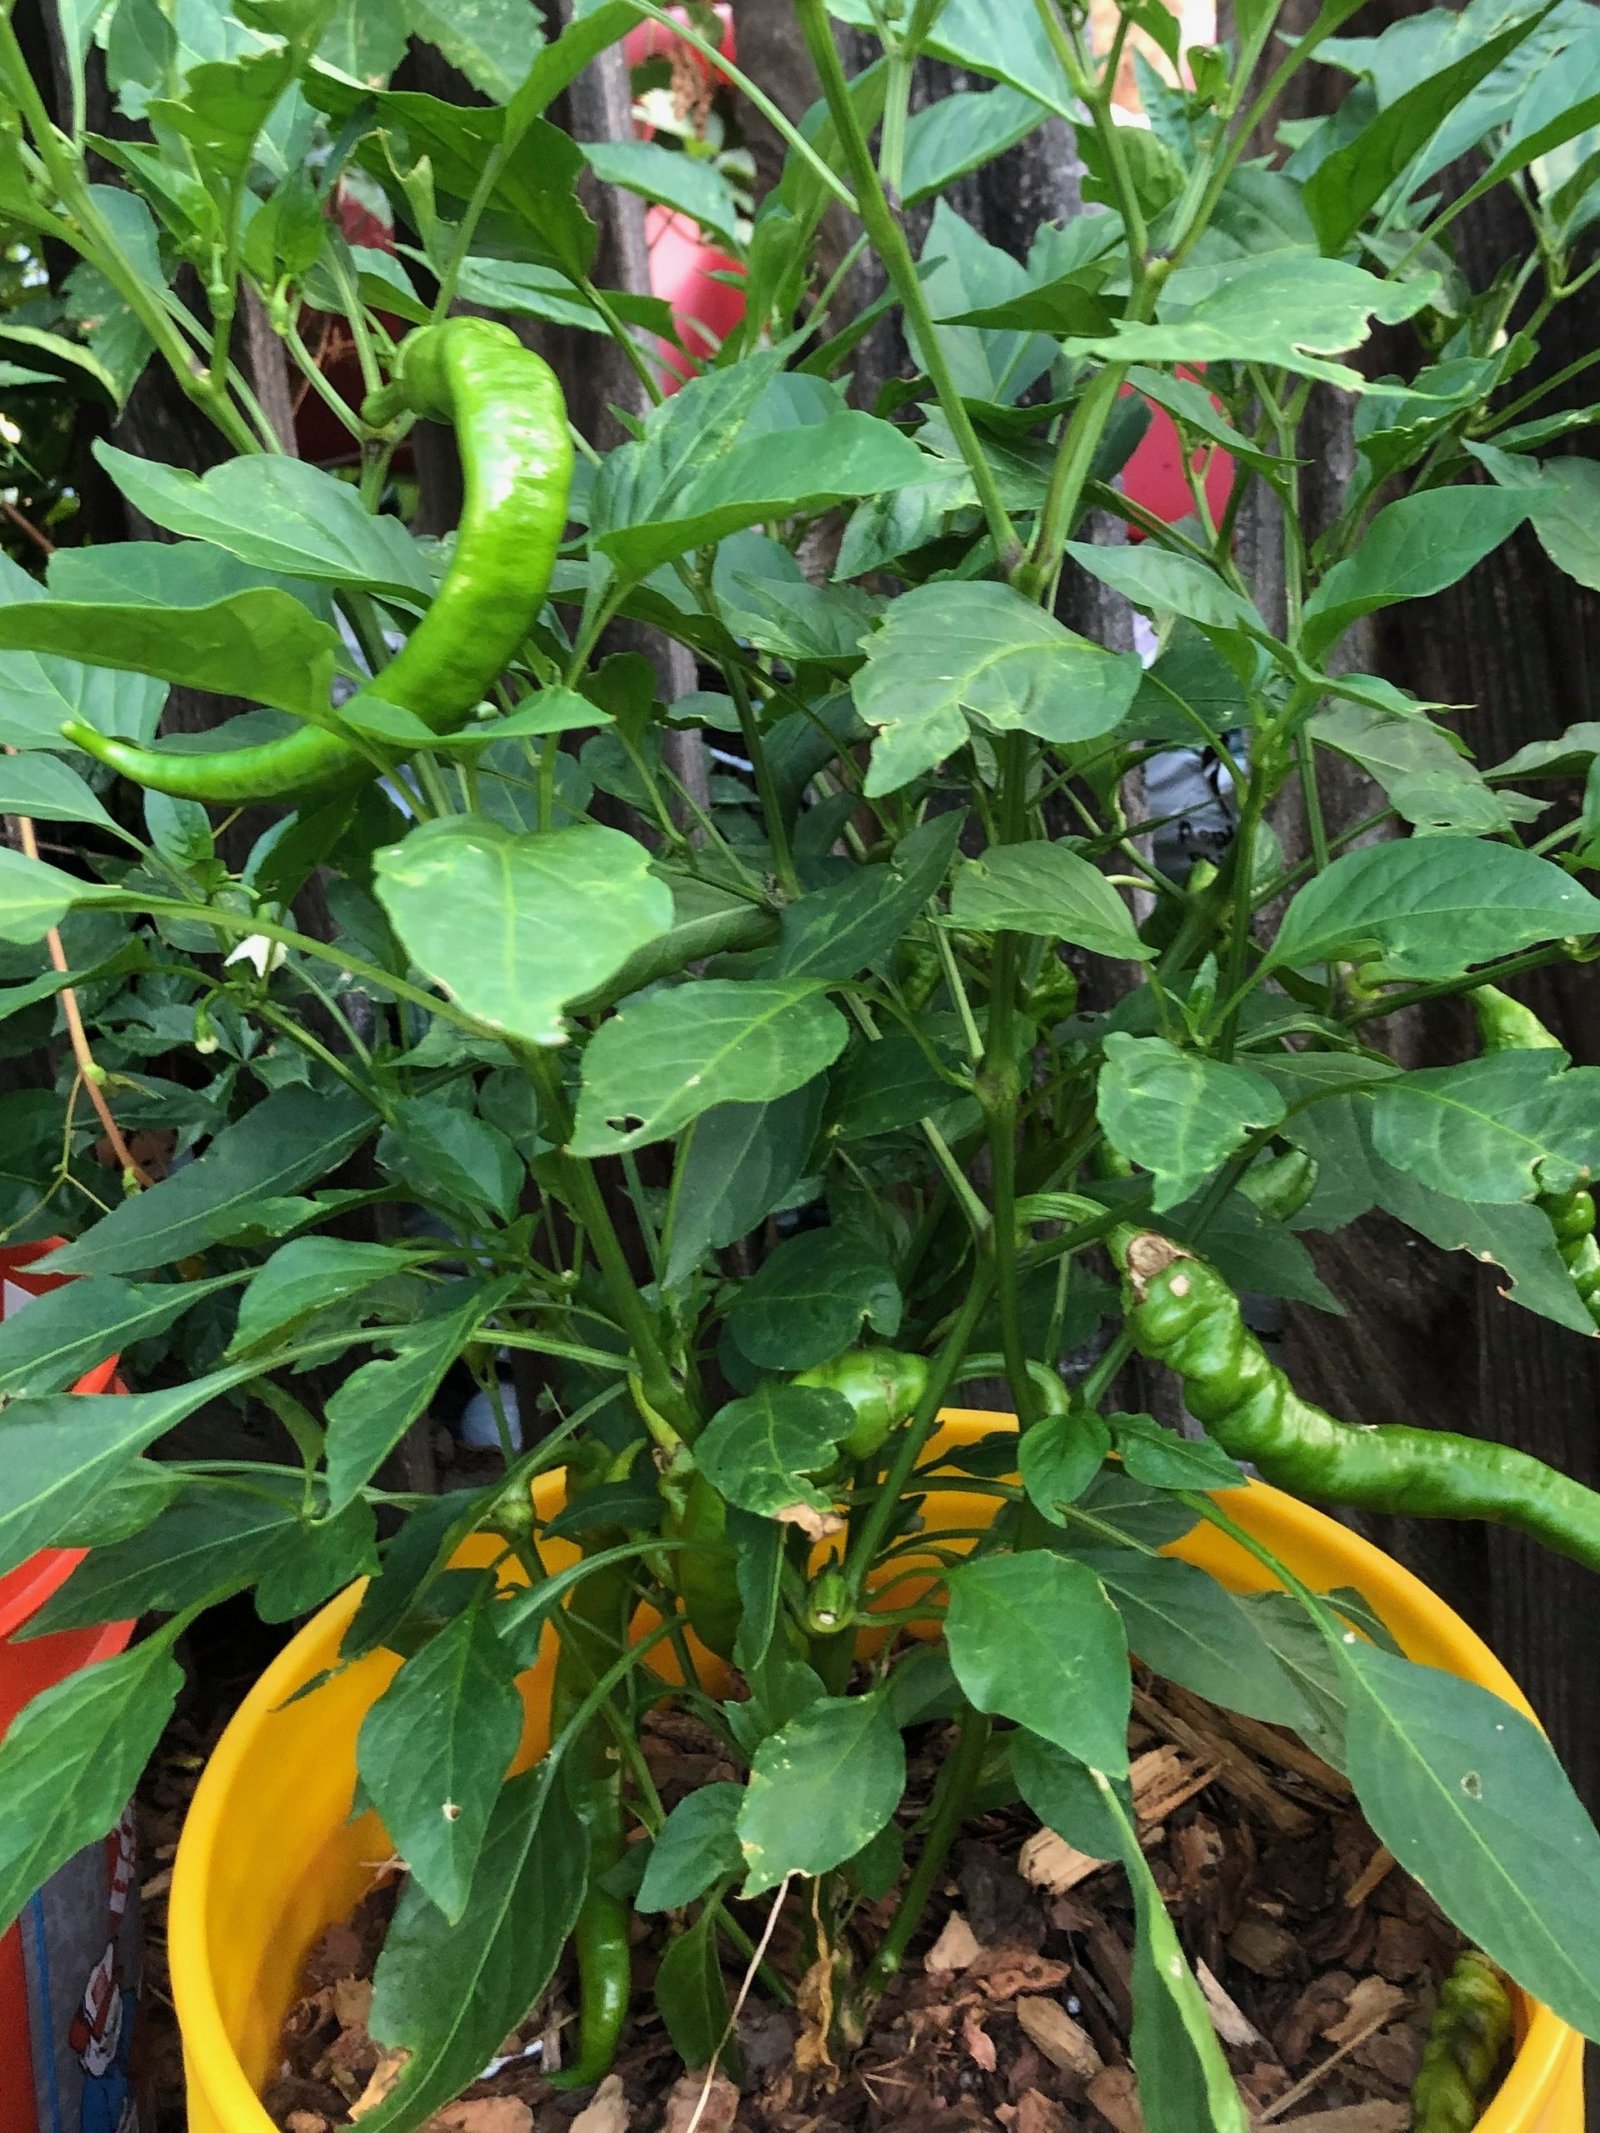 Mature Jimmy Nardello plant with peppers